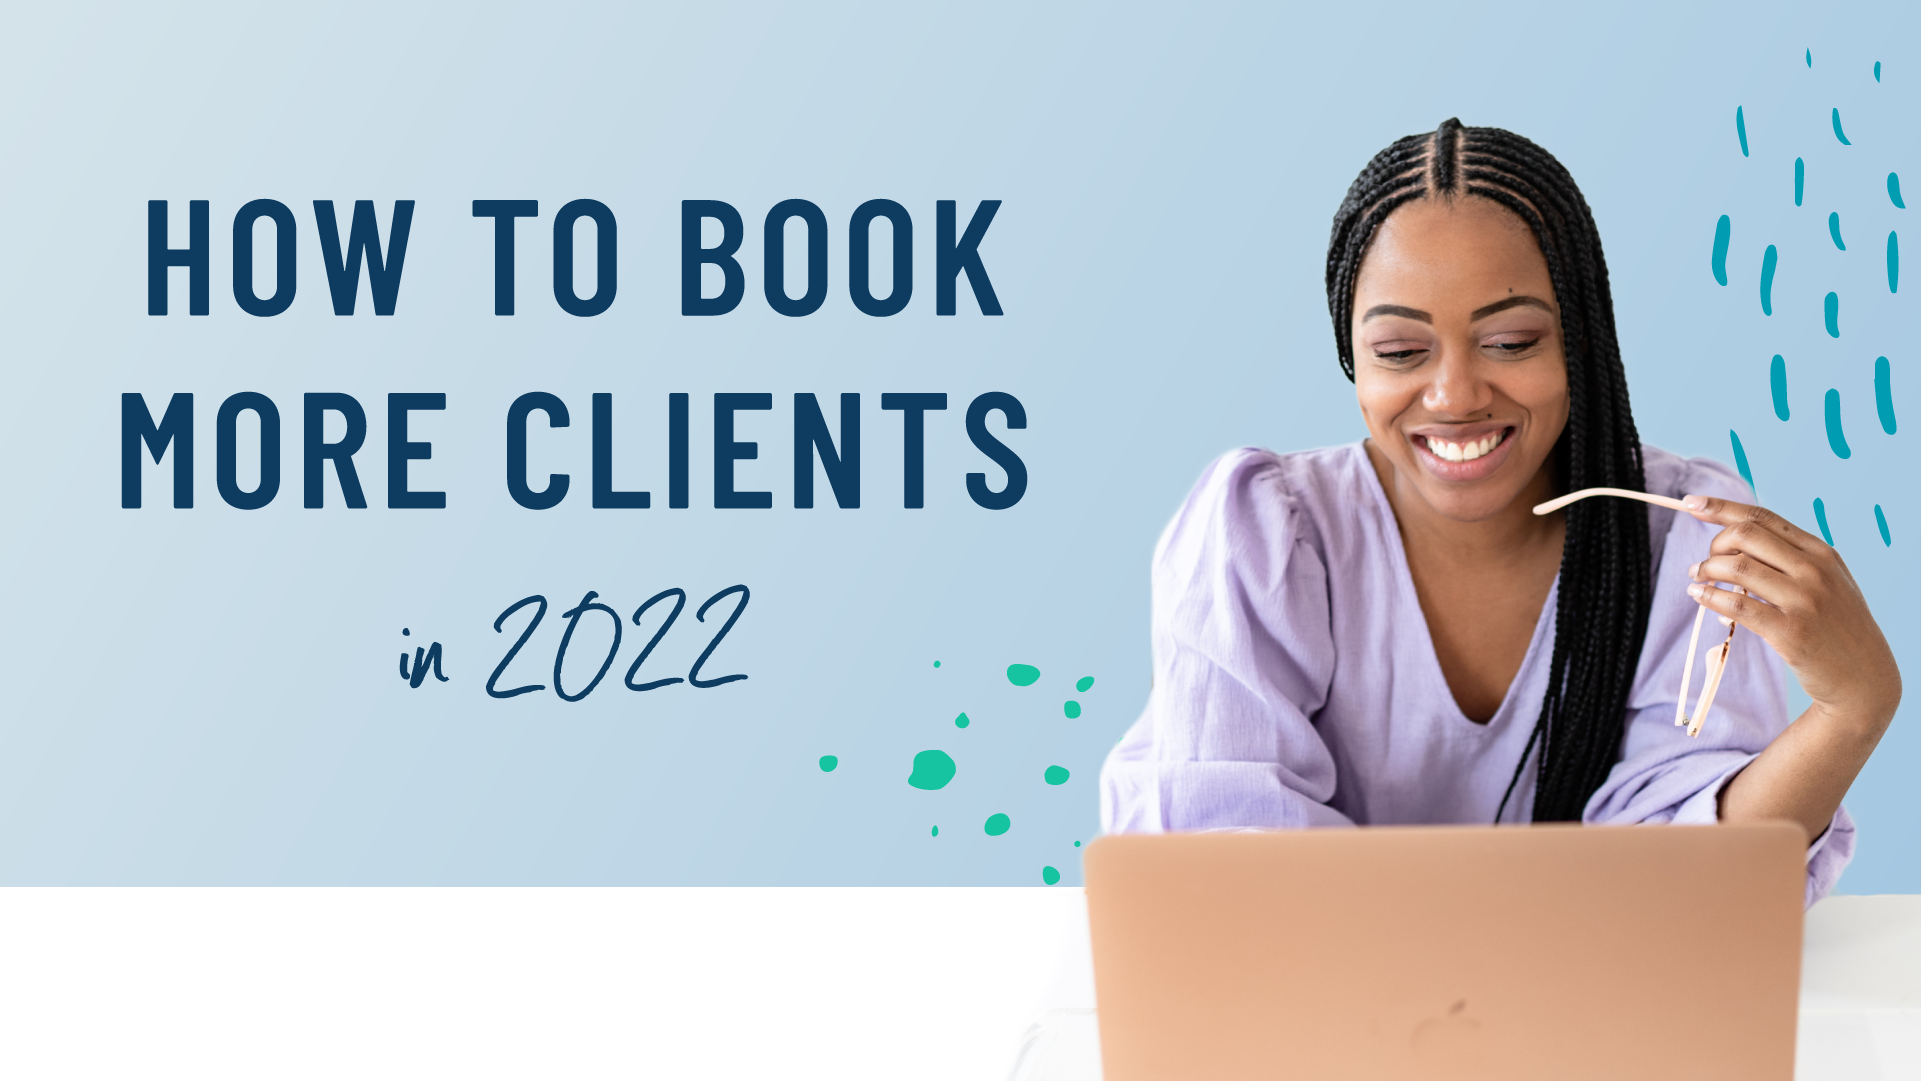 Get Ready for 2022: Book More Clients Without Burning Out